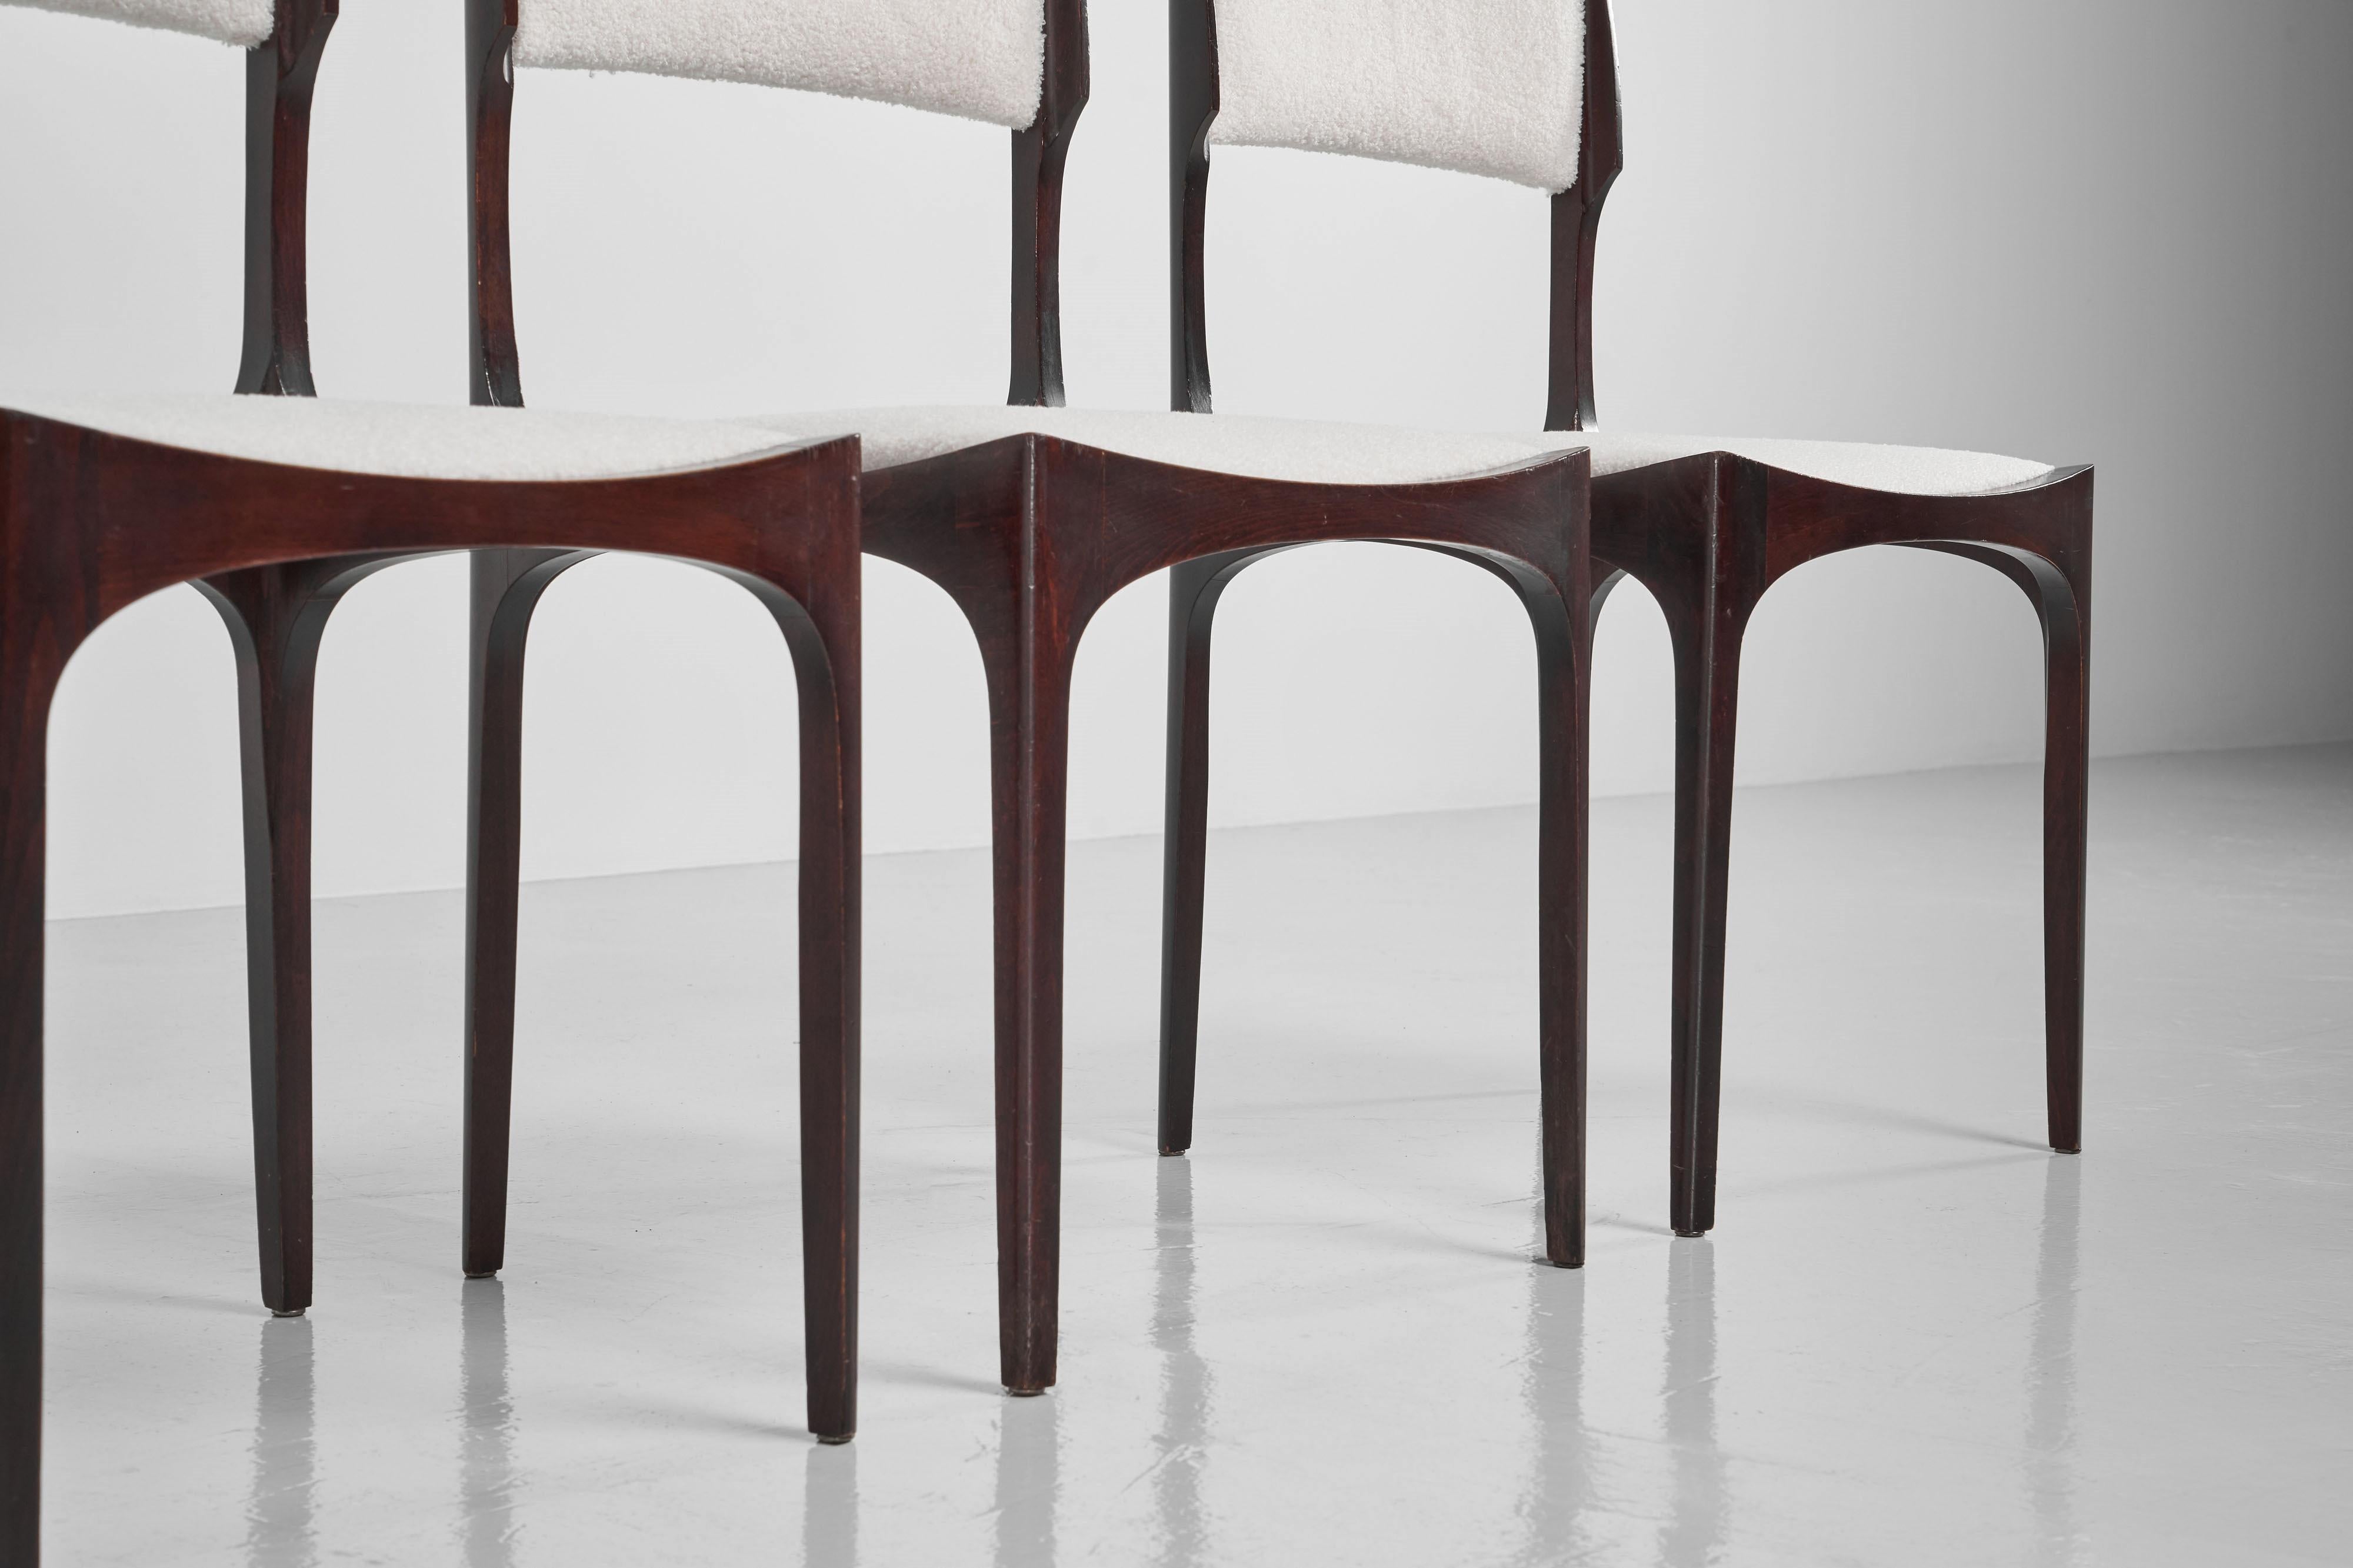 Highly refined set of 6 ‘Elisabetta’ dining chairs designed by Giuseppe Gibelli and manufactured by Sormani, Italy 1963. The chairs have a solid ash wooden frame which is finished with a mahogany stain which is towards a red brown colour like